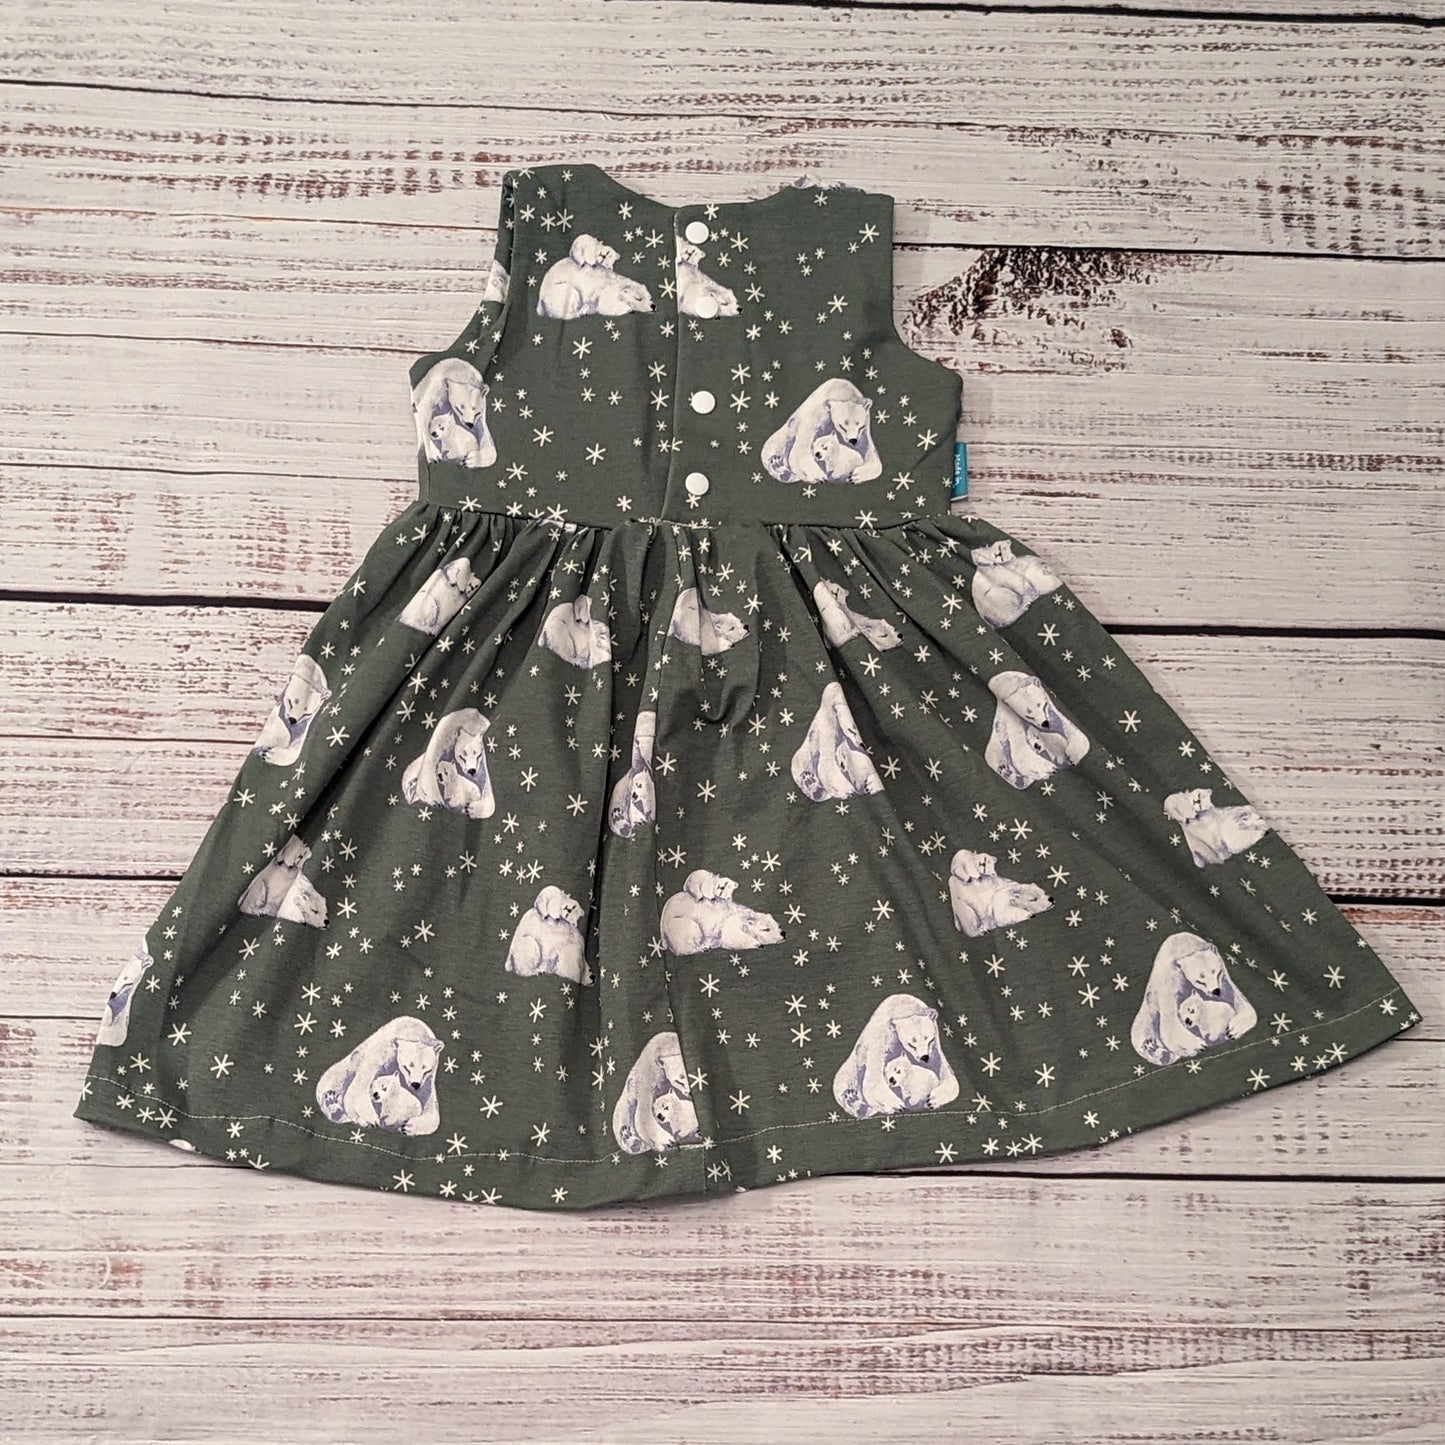 Rear of sleeveless girls Christmas dress, handmade using the gorgeous polar bears cotton jersey. With poppers used in dresses over 9-12 months, smaller sizes have poppers the length of the dress.